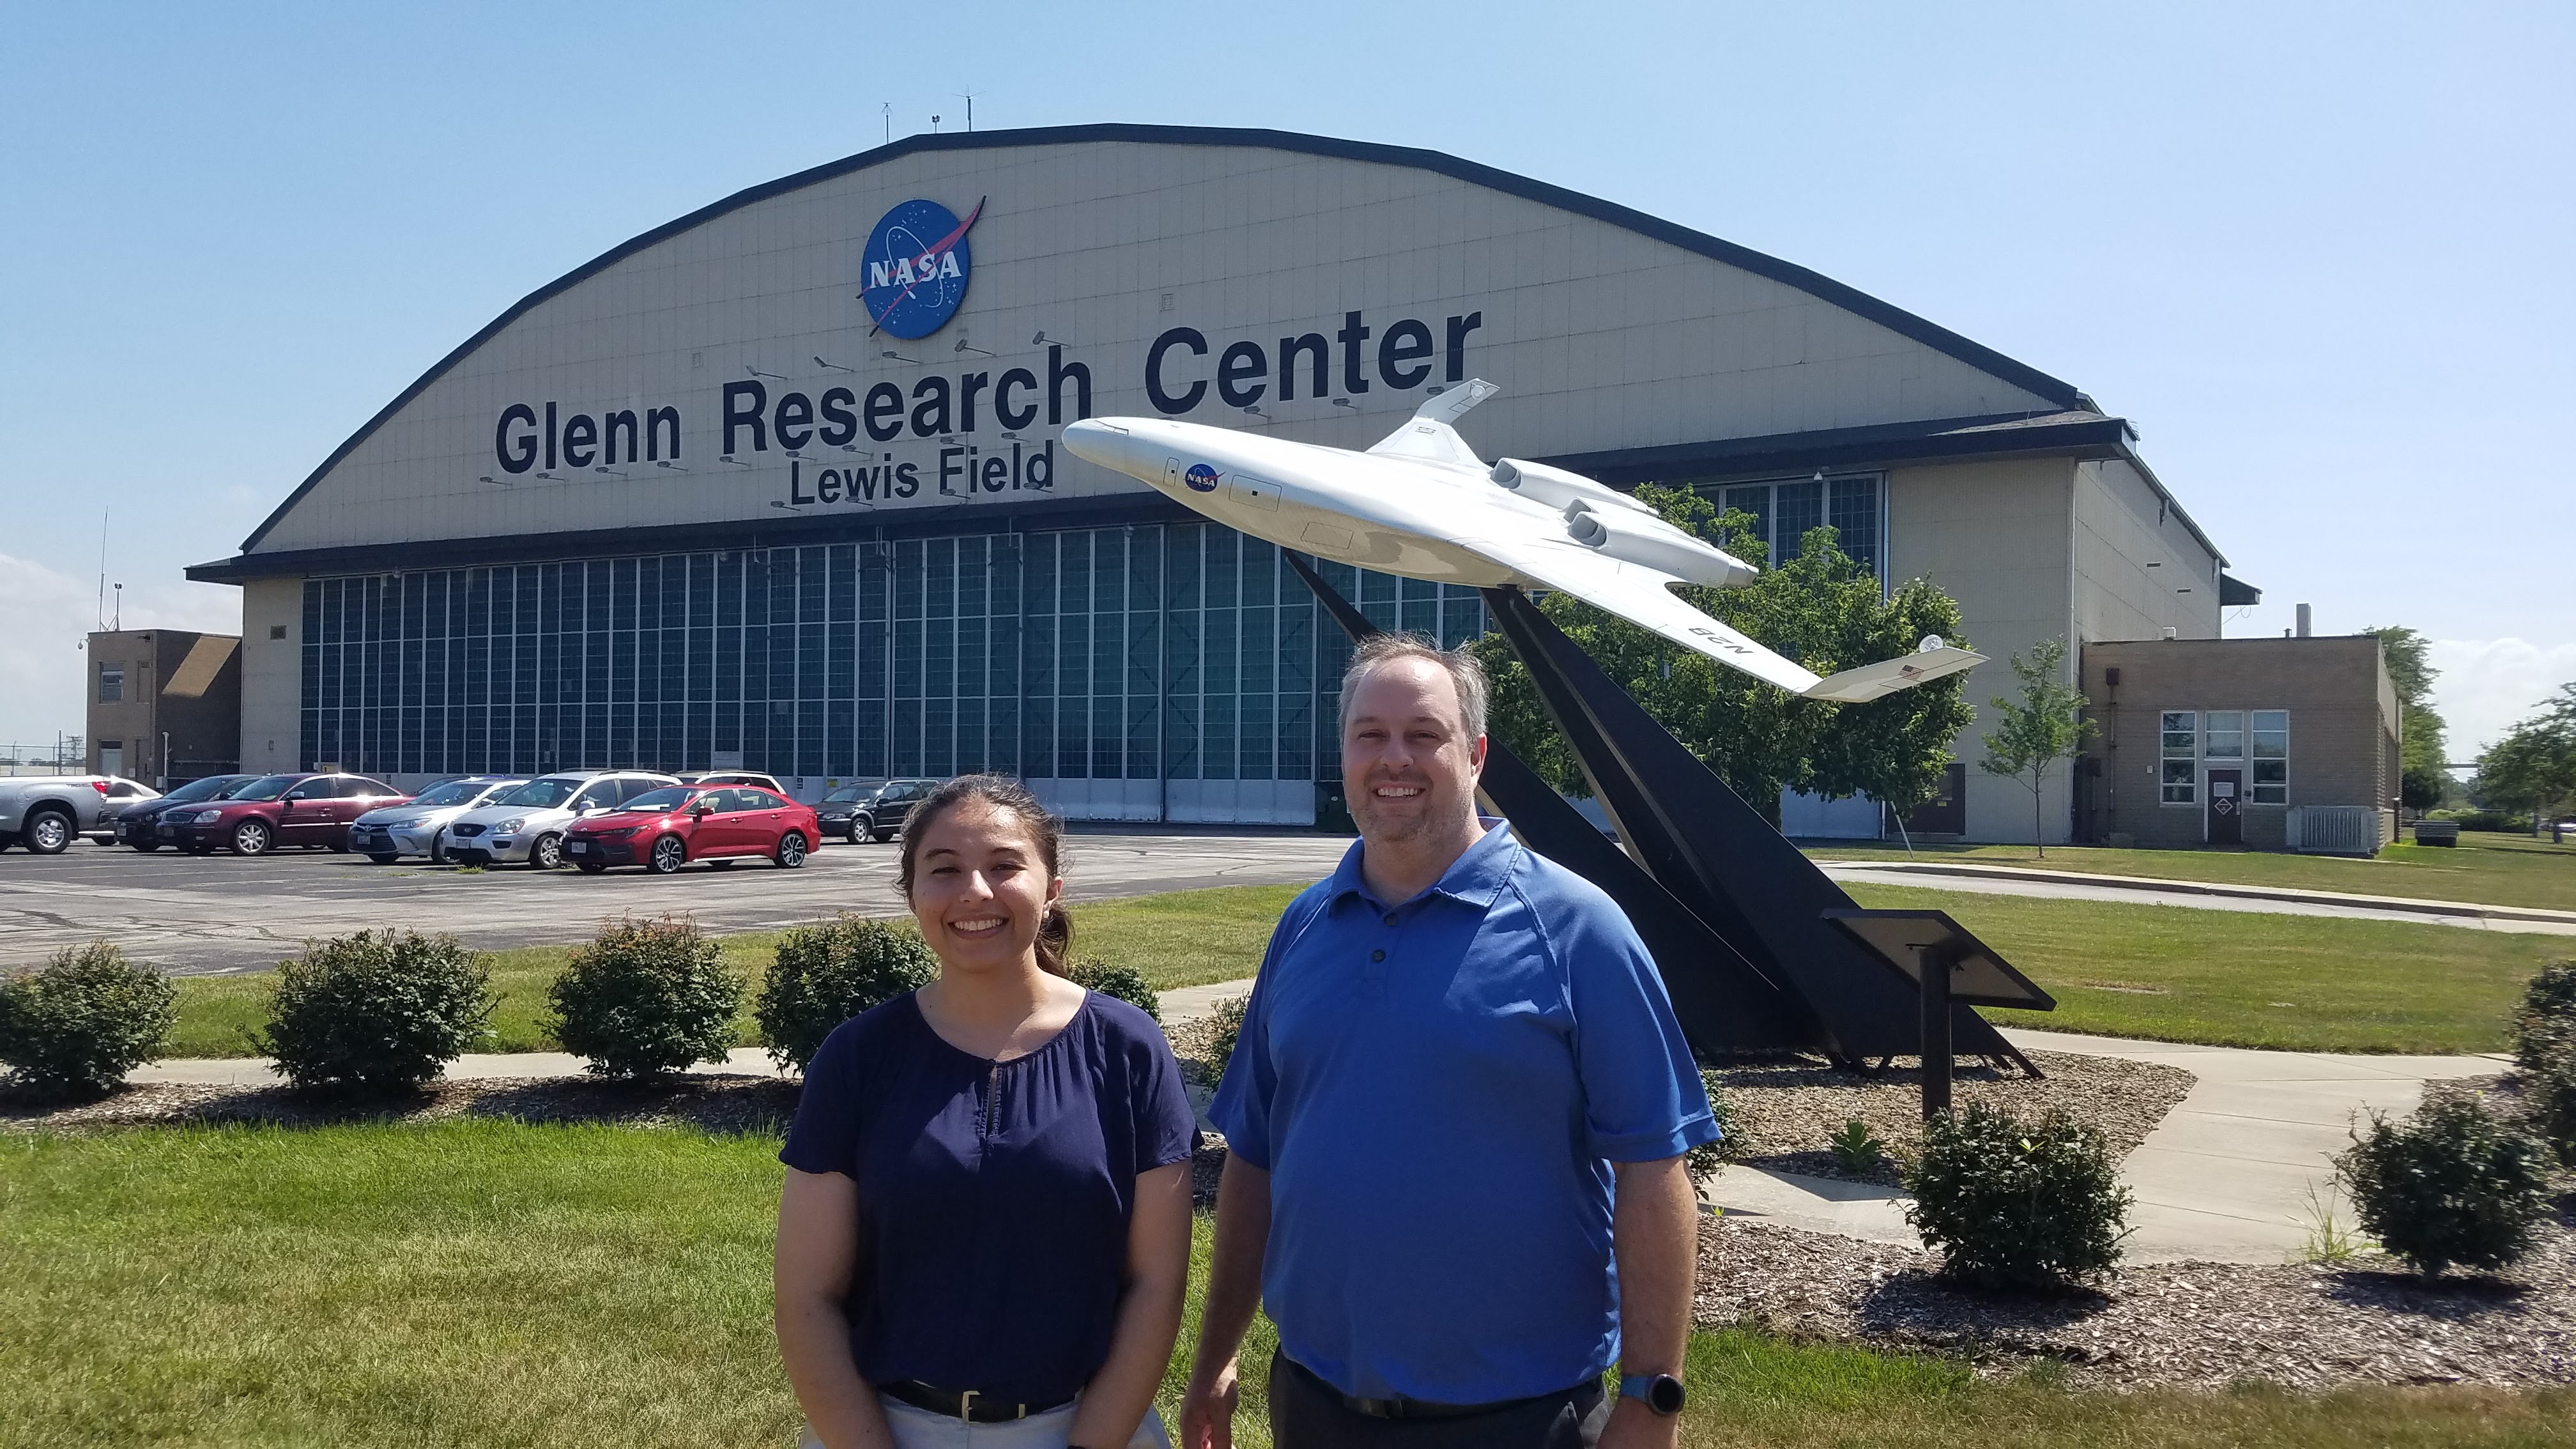 student and faculty member in front of nasa glenn center buidling